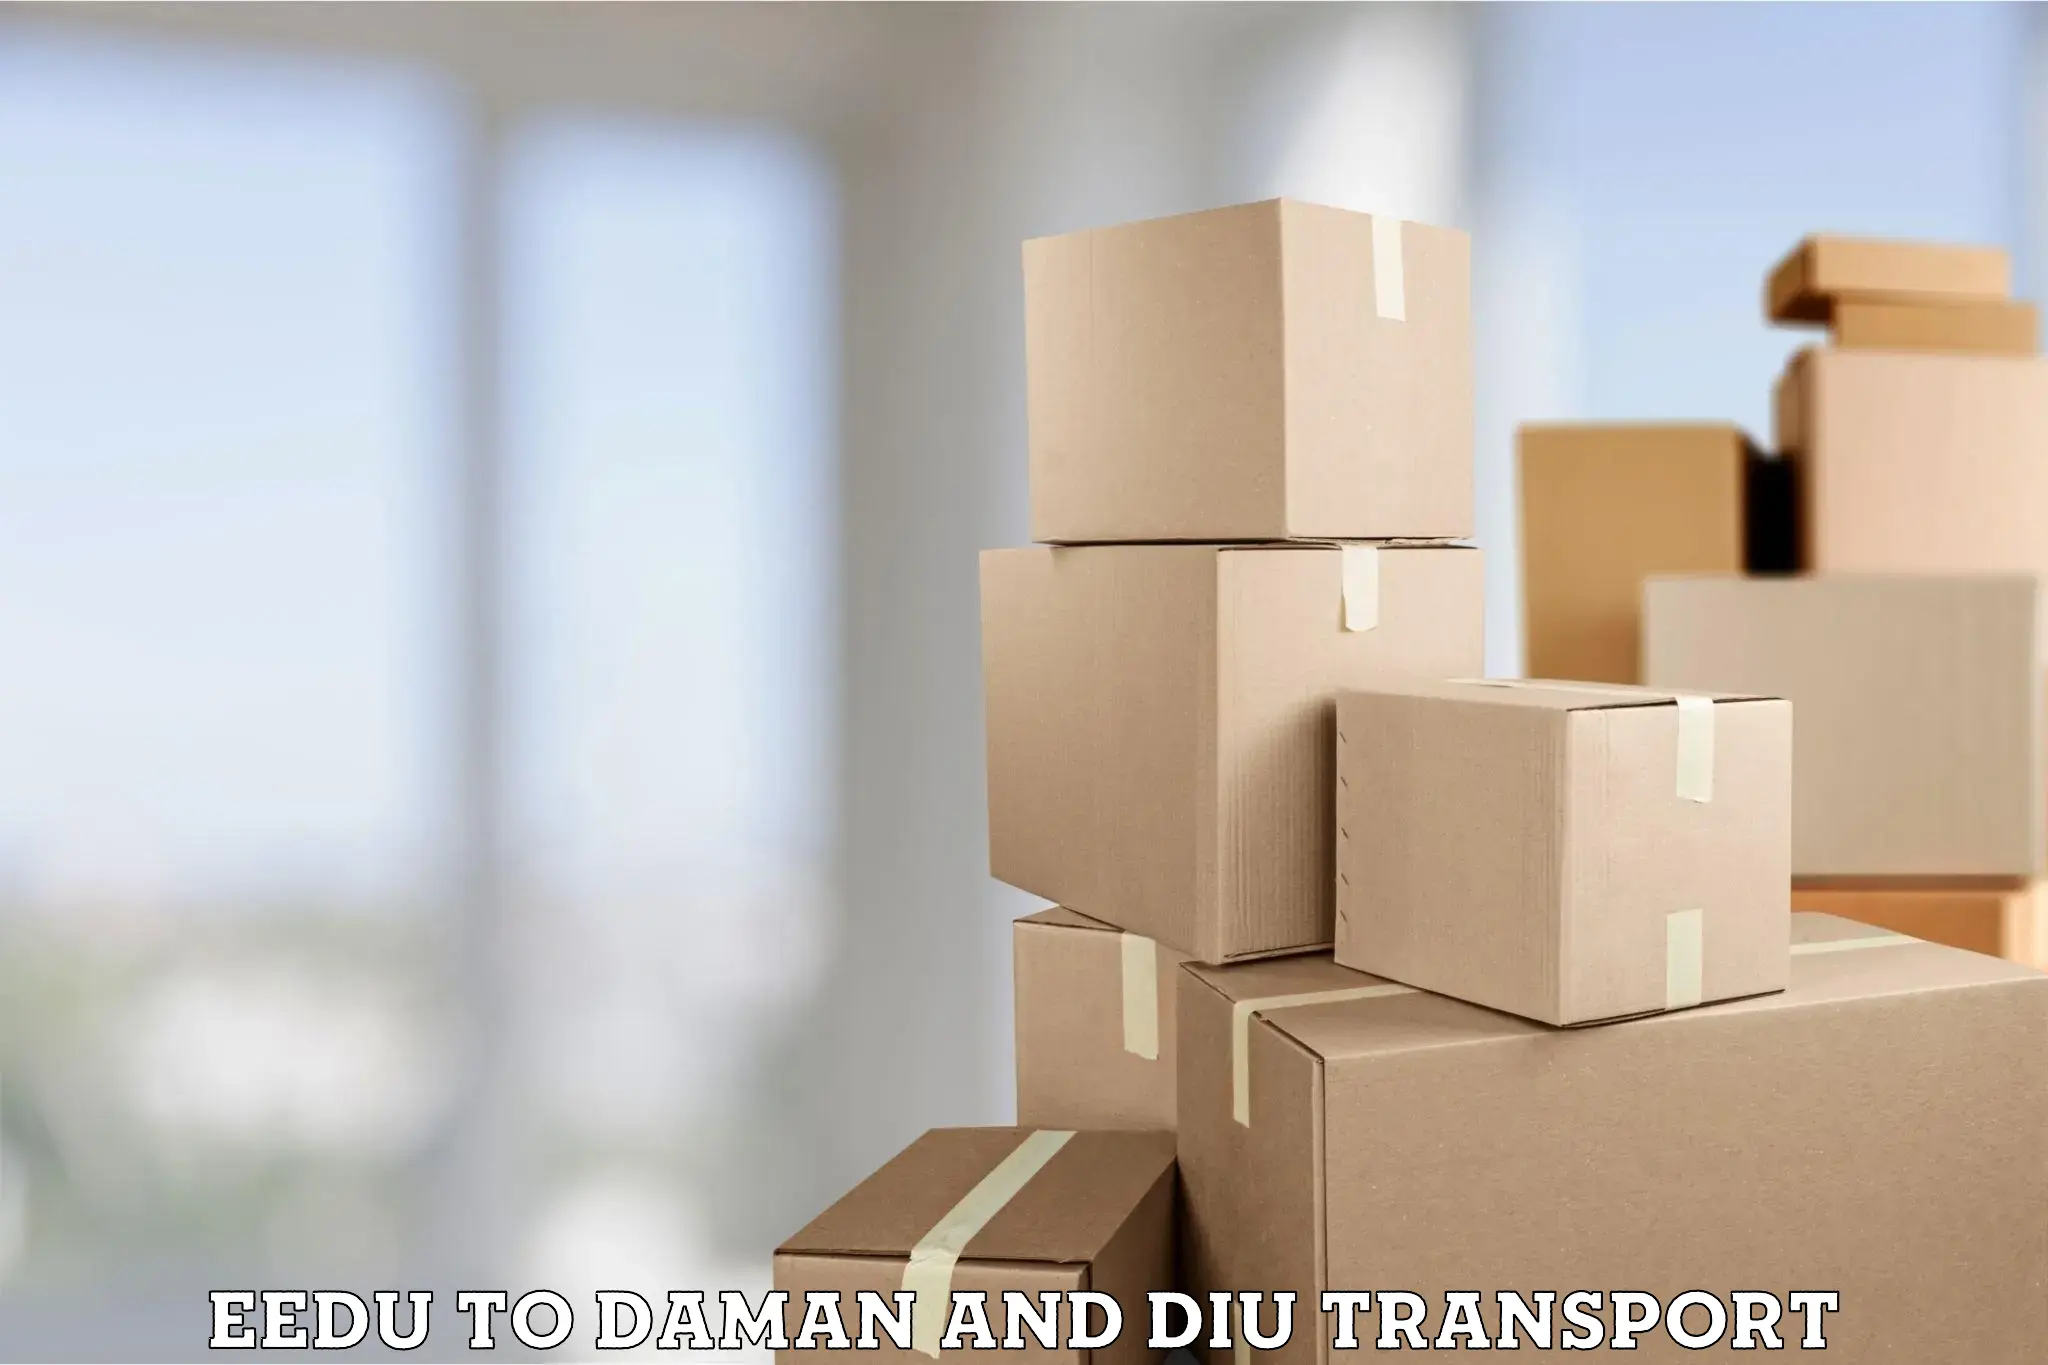 Daily parcel service transport in Eedu to Diu